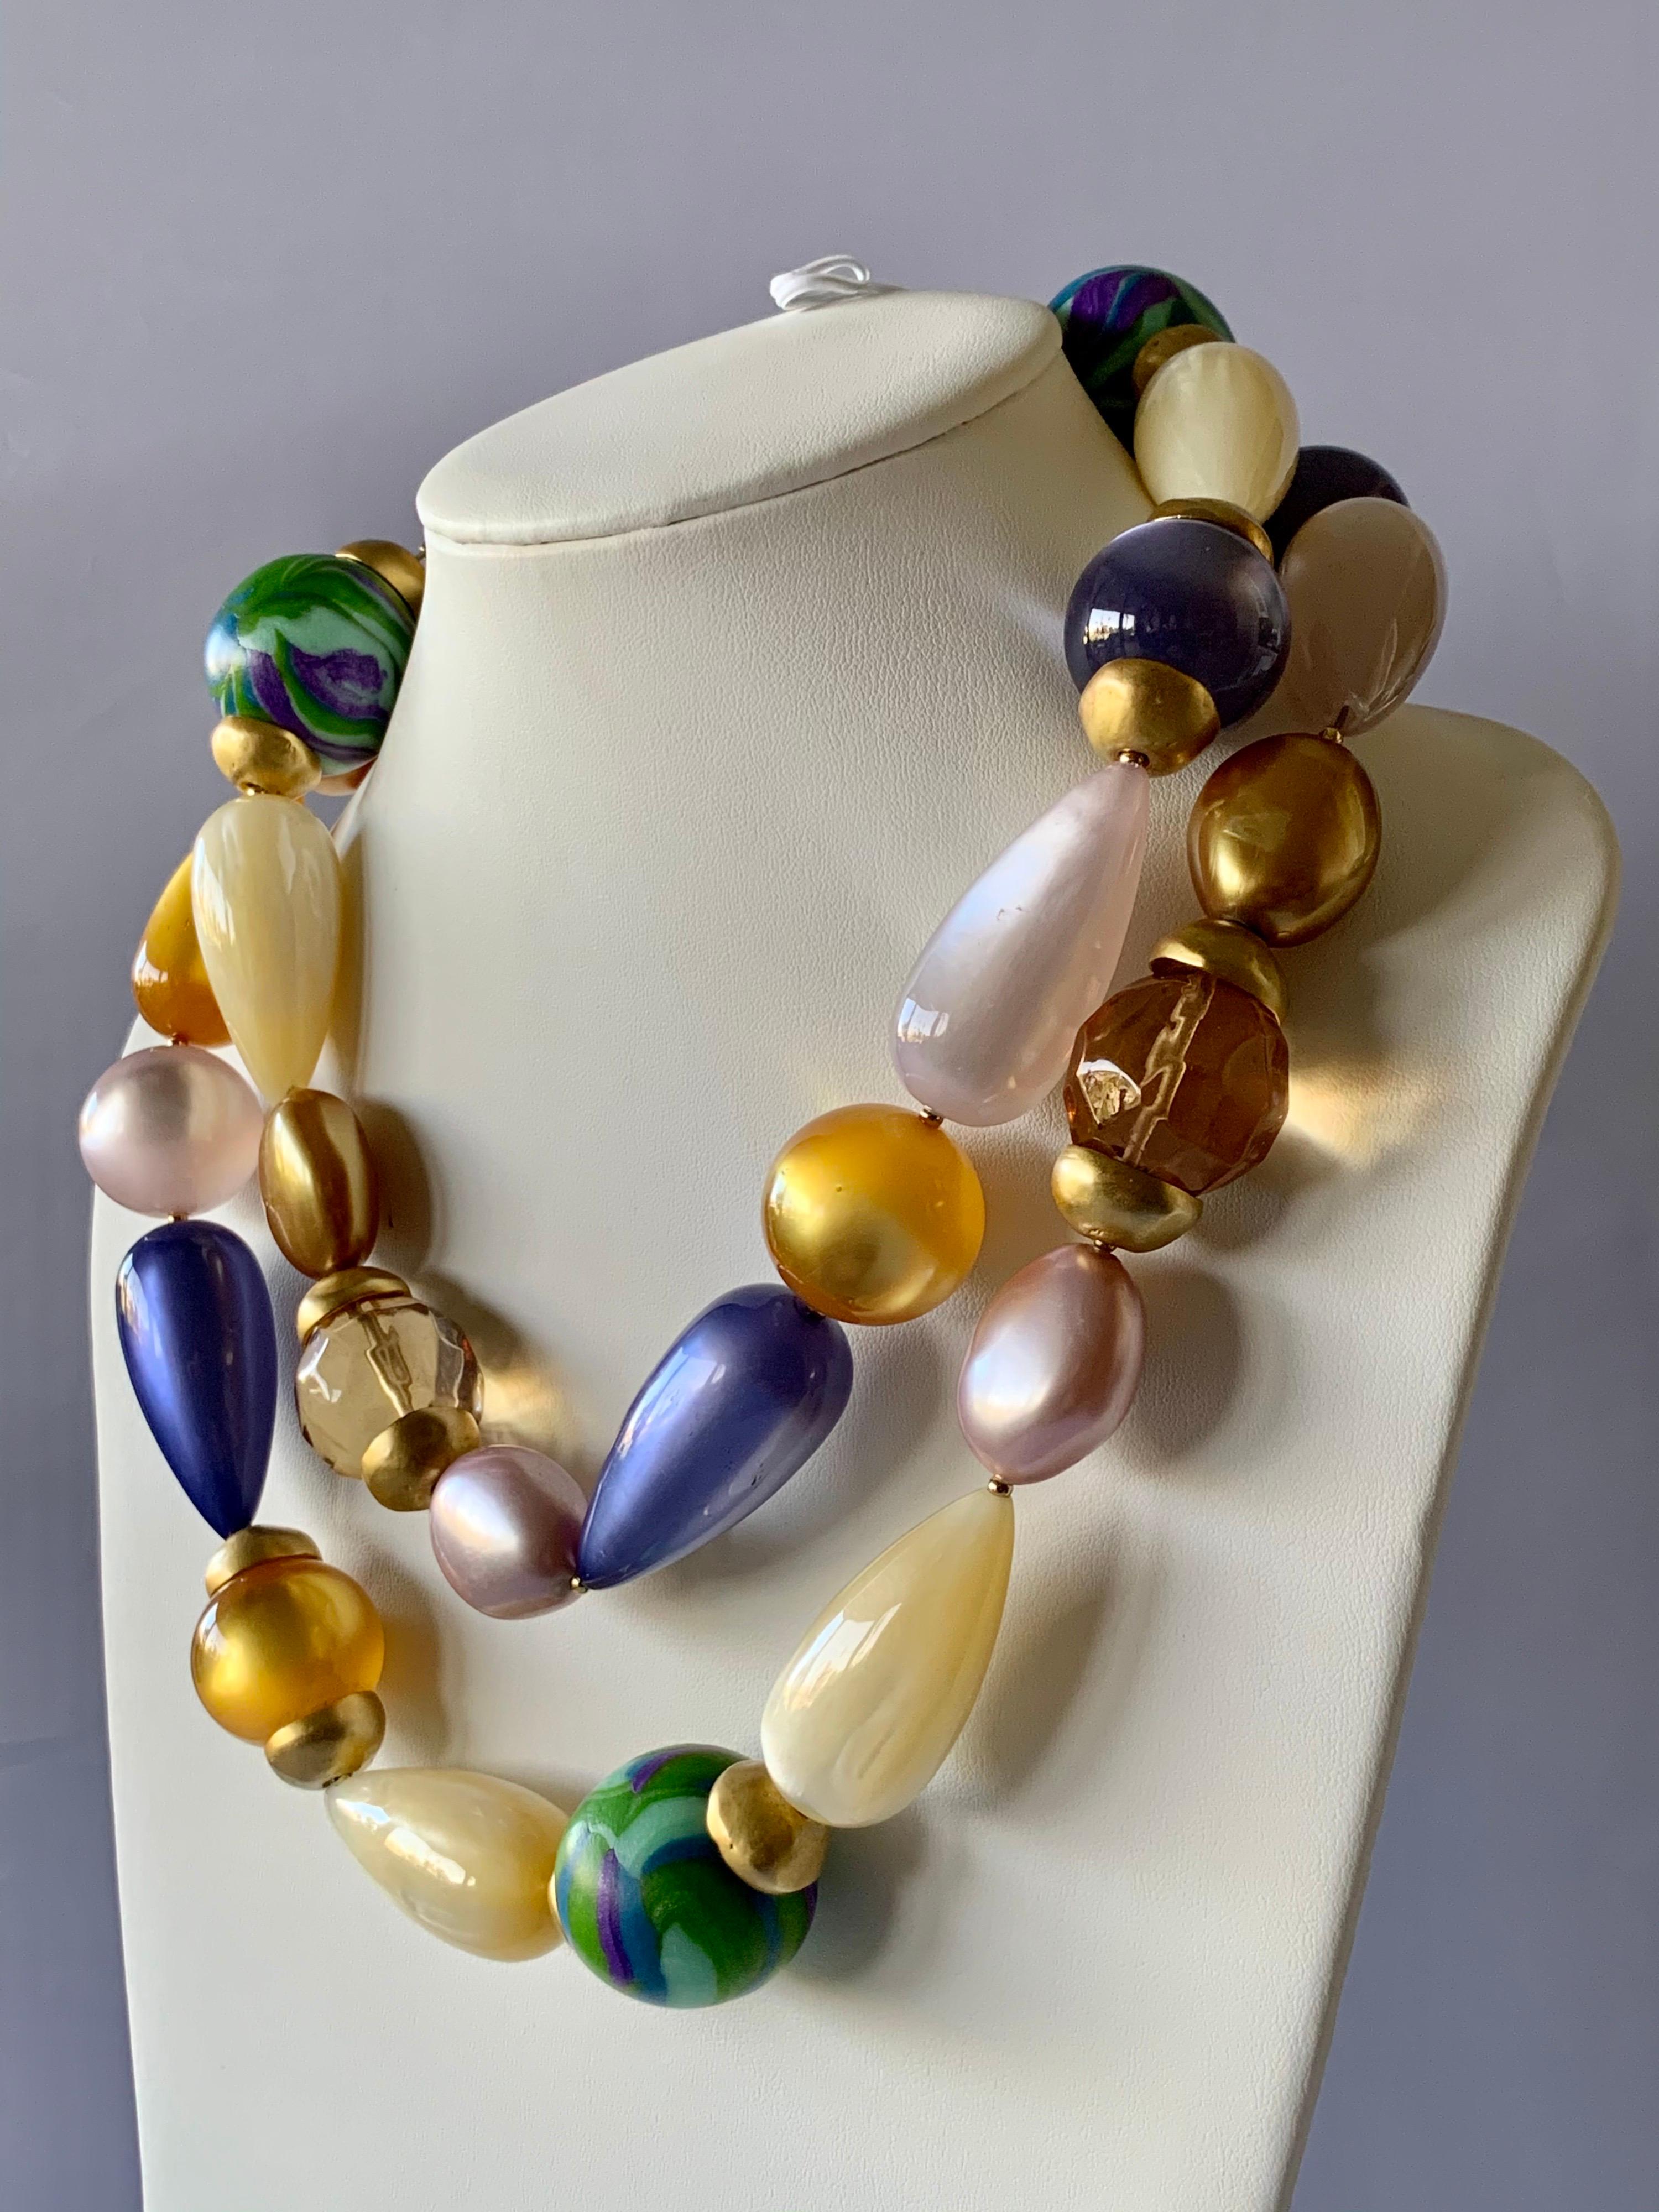 Iconic massive vintage Coco Chanel runway beaded statement necklace, comprised out of large architectural acrylic beads. The beads vary in shape, size, and color (taupe, Moonglow blue, pale pink, gold, and swirled green and accented by large faceted